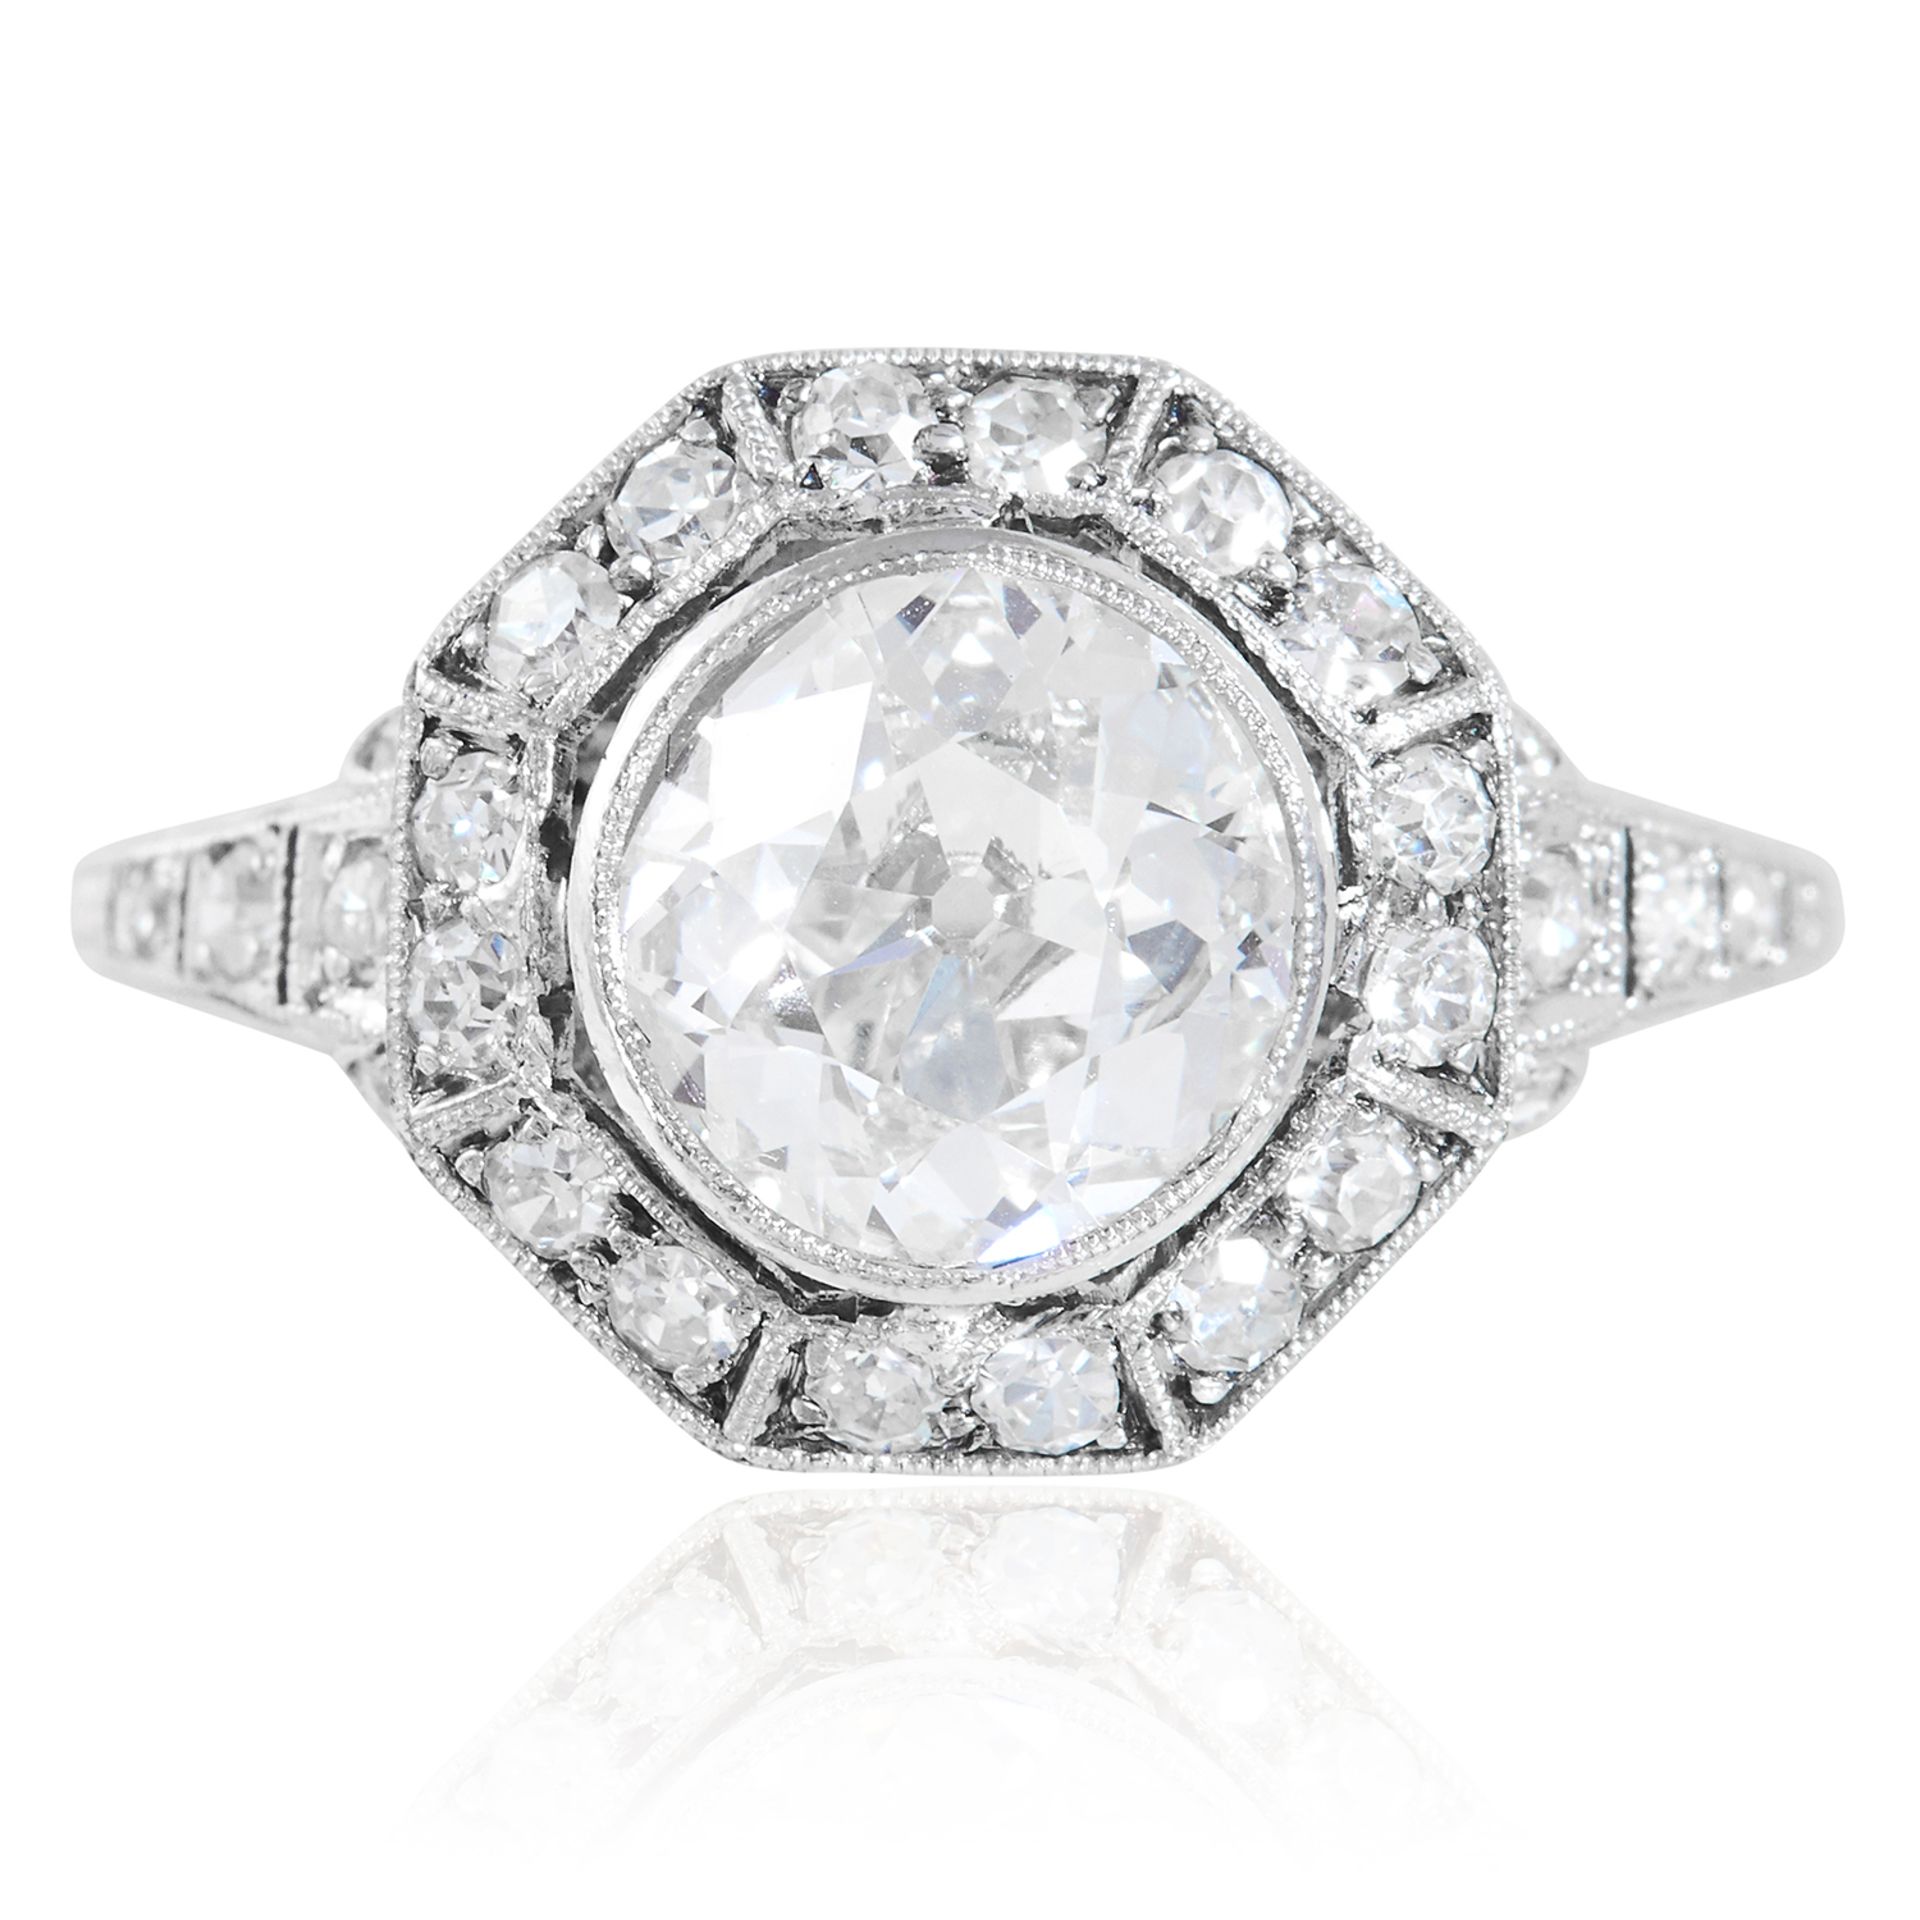 A 1.57 CARAT DIAMOND DRESS RING in white gold or platinum, in Art Deco style, set with an old cut